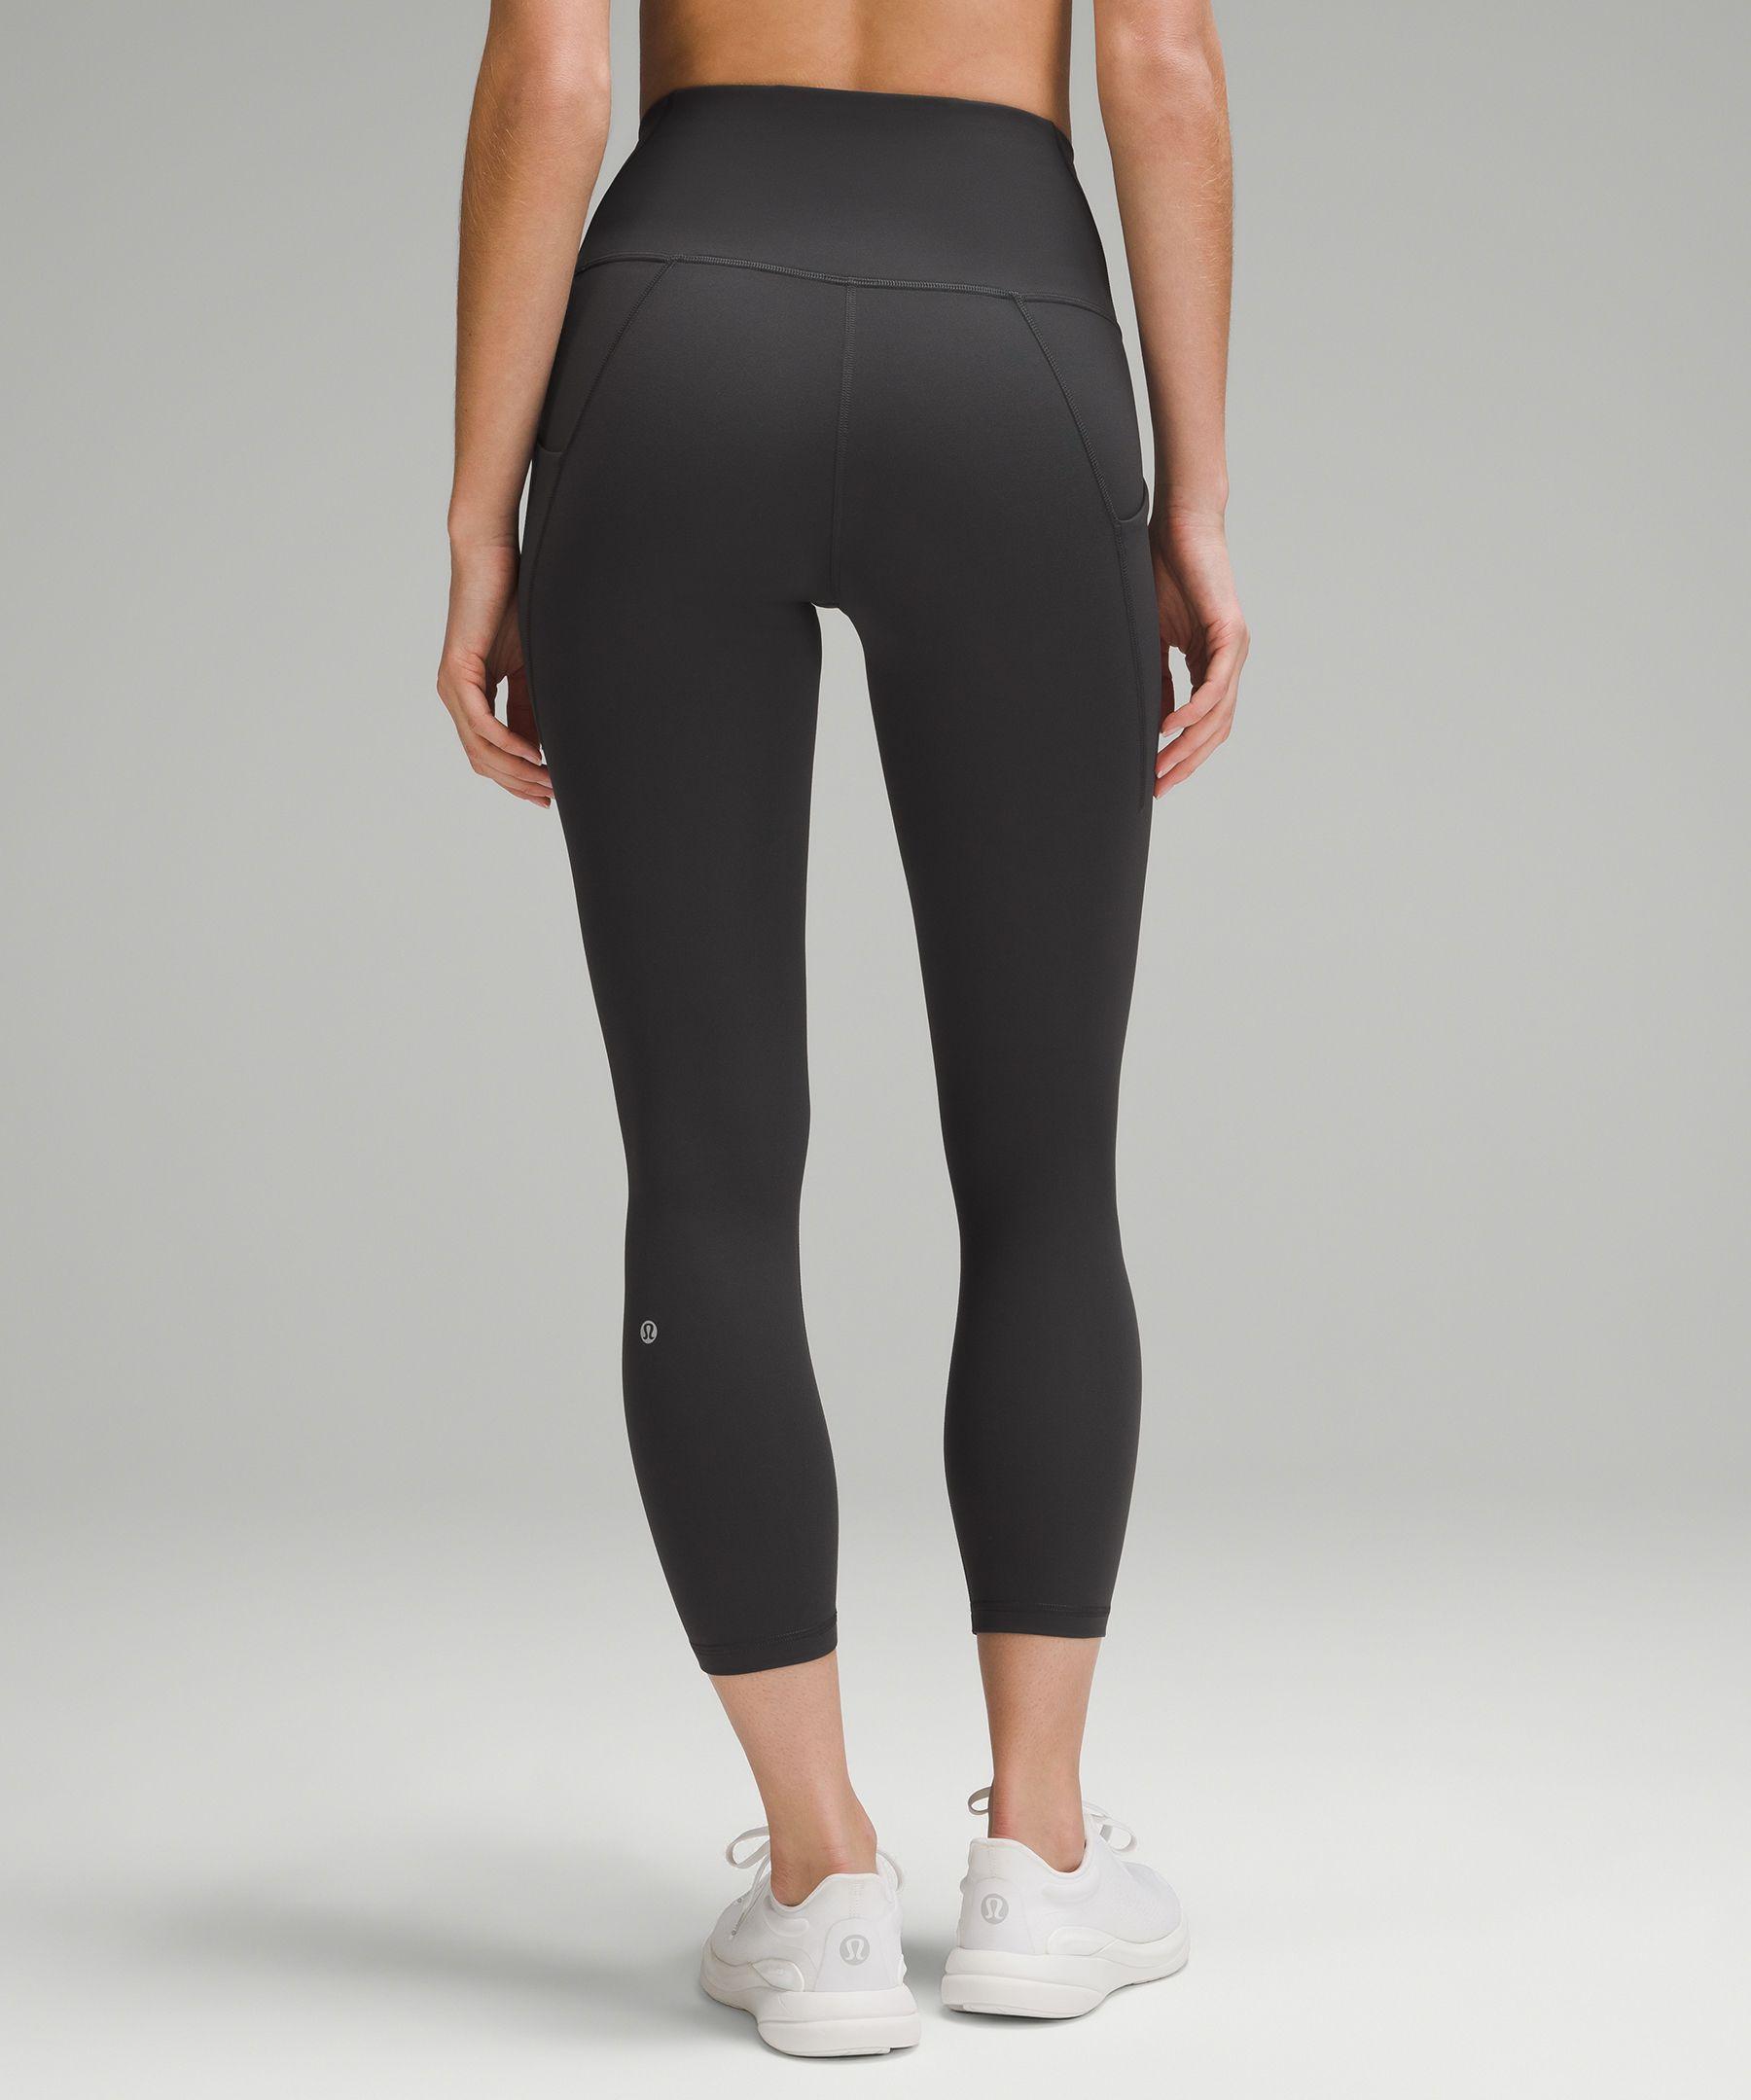 lululemon athletica Wunder Train High-rise Crop With Pockets 23 in Black